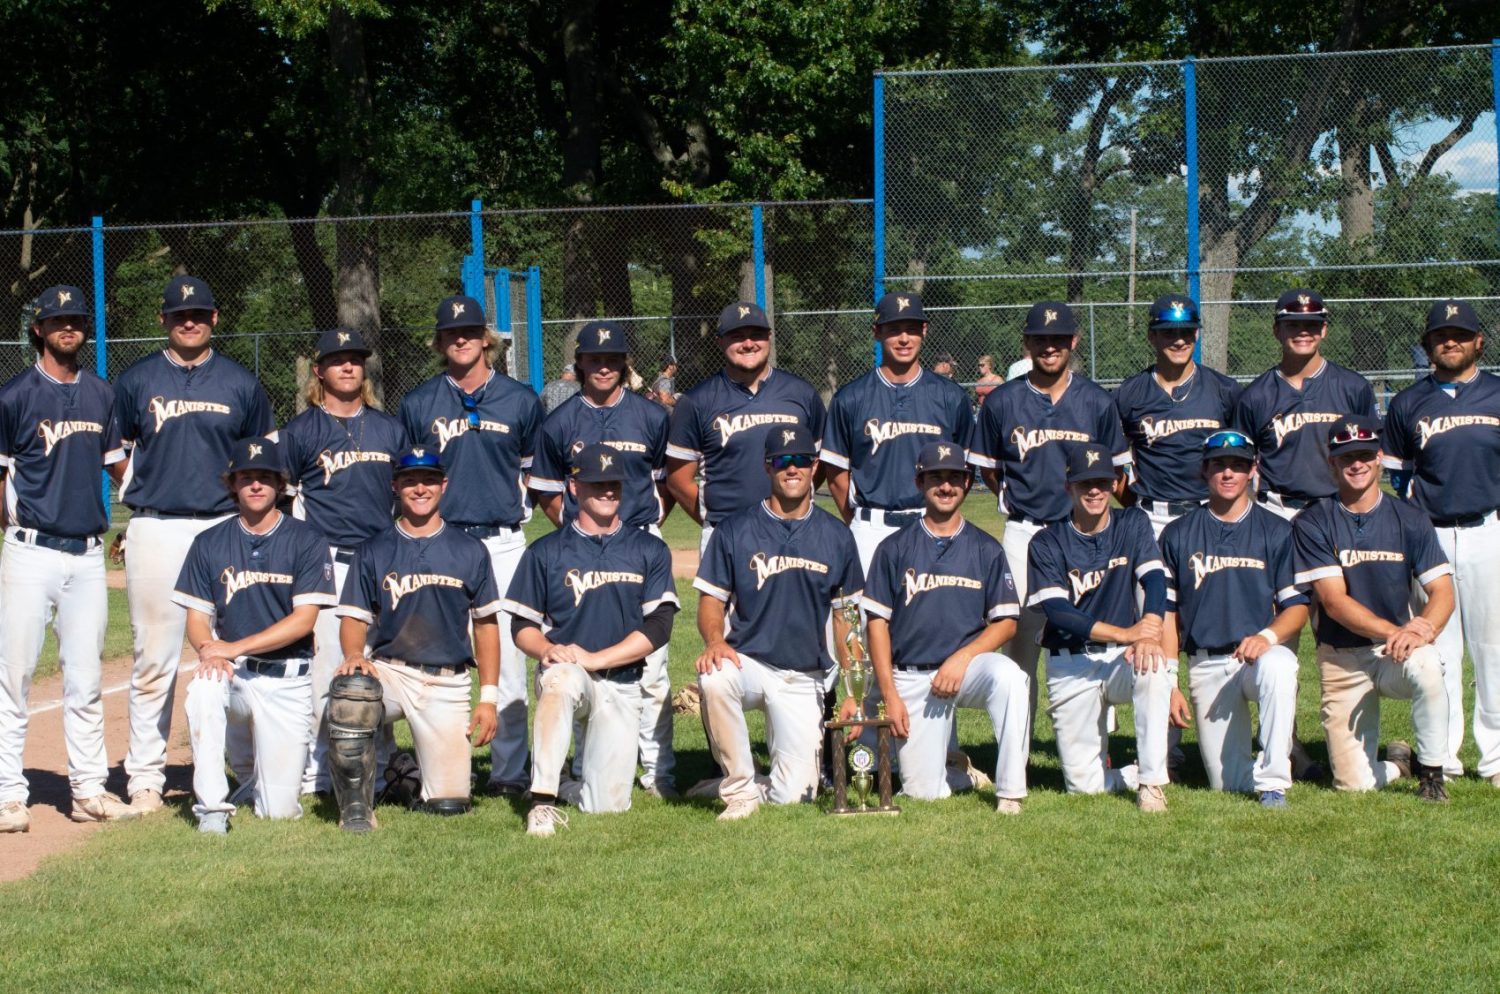 Manistee Saints season comes to an end with 10-9 loss to the Chicago Clout in the NABF World Series